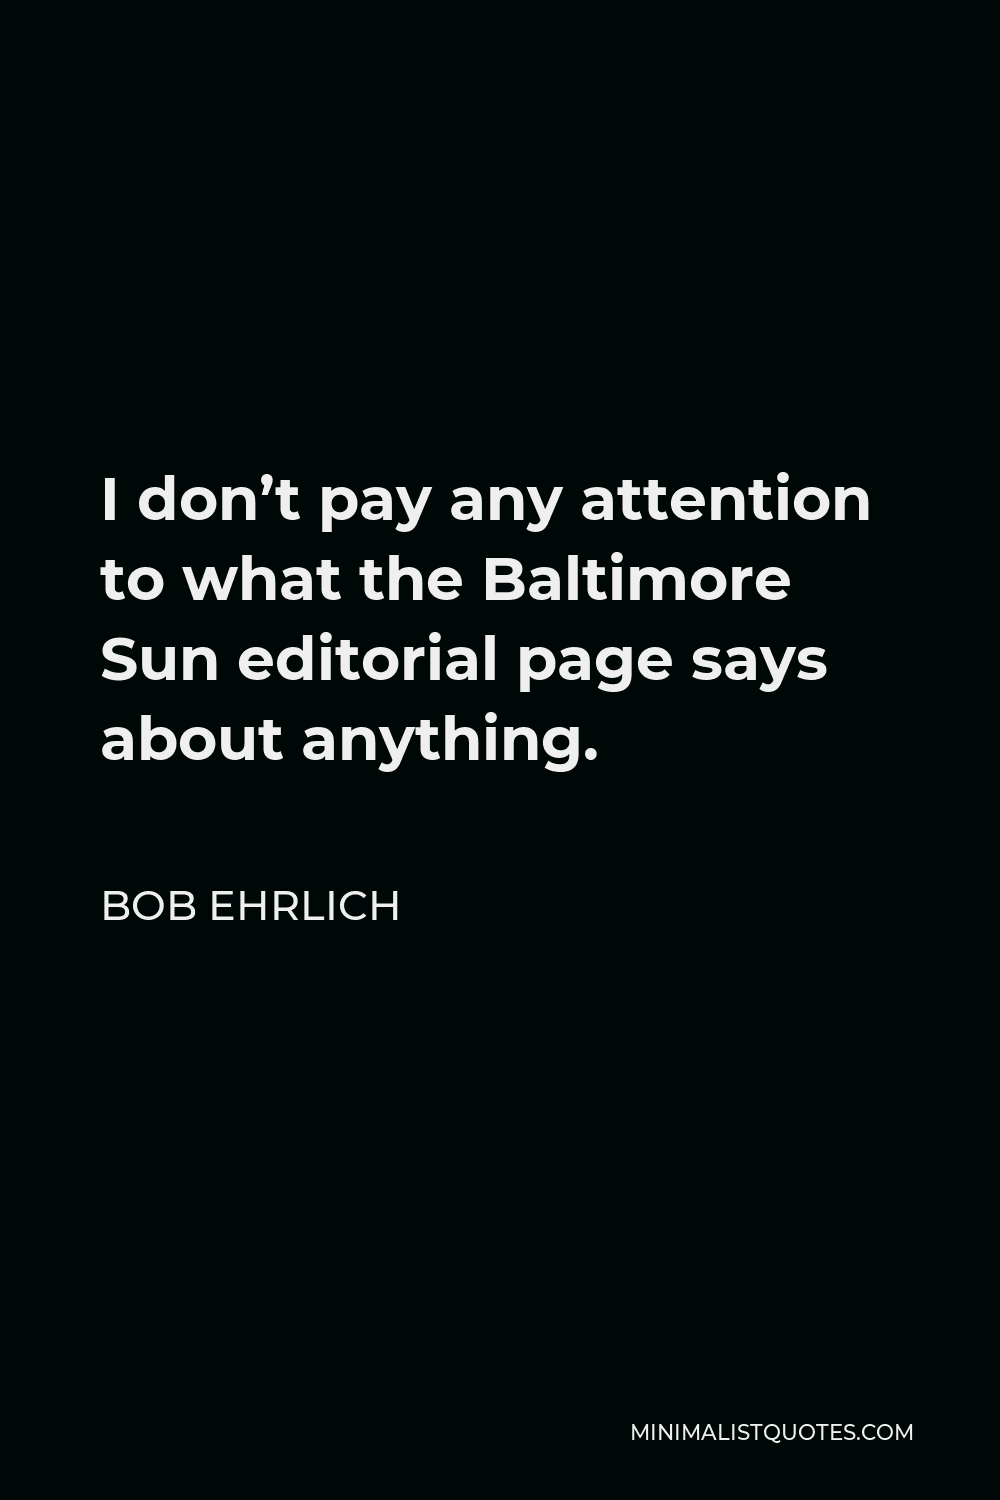 Bob Ehrlich Quote - I don’t pay any attention to what the Baltimore Sun editorial page says about anything.